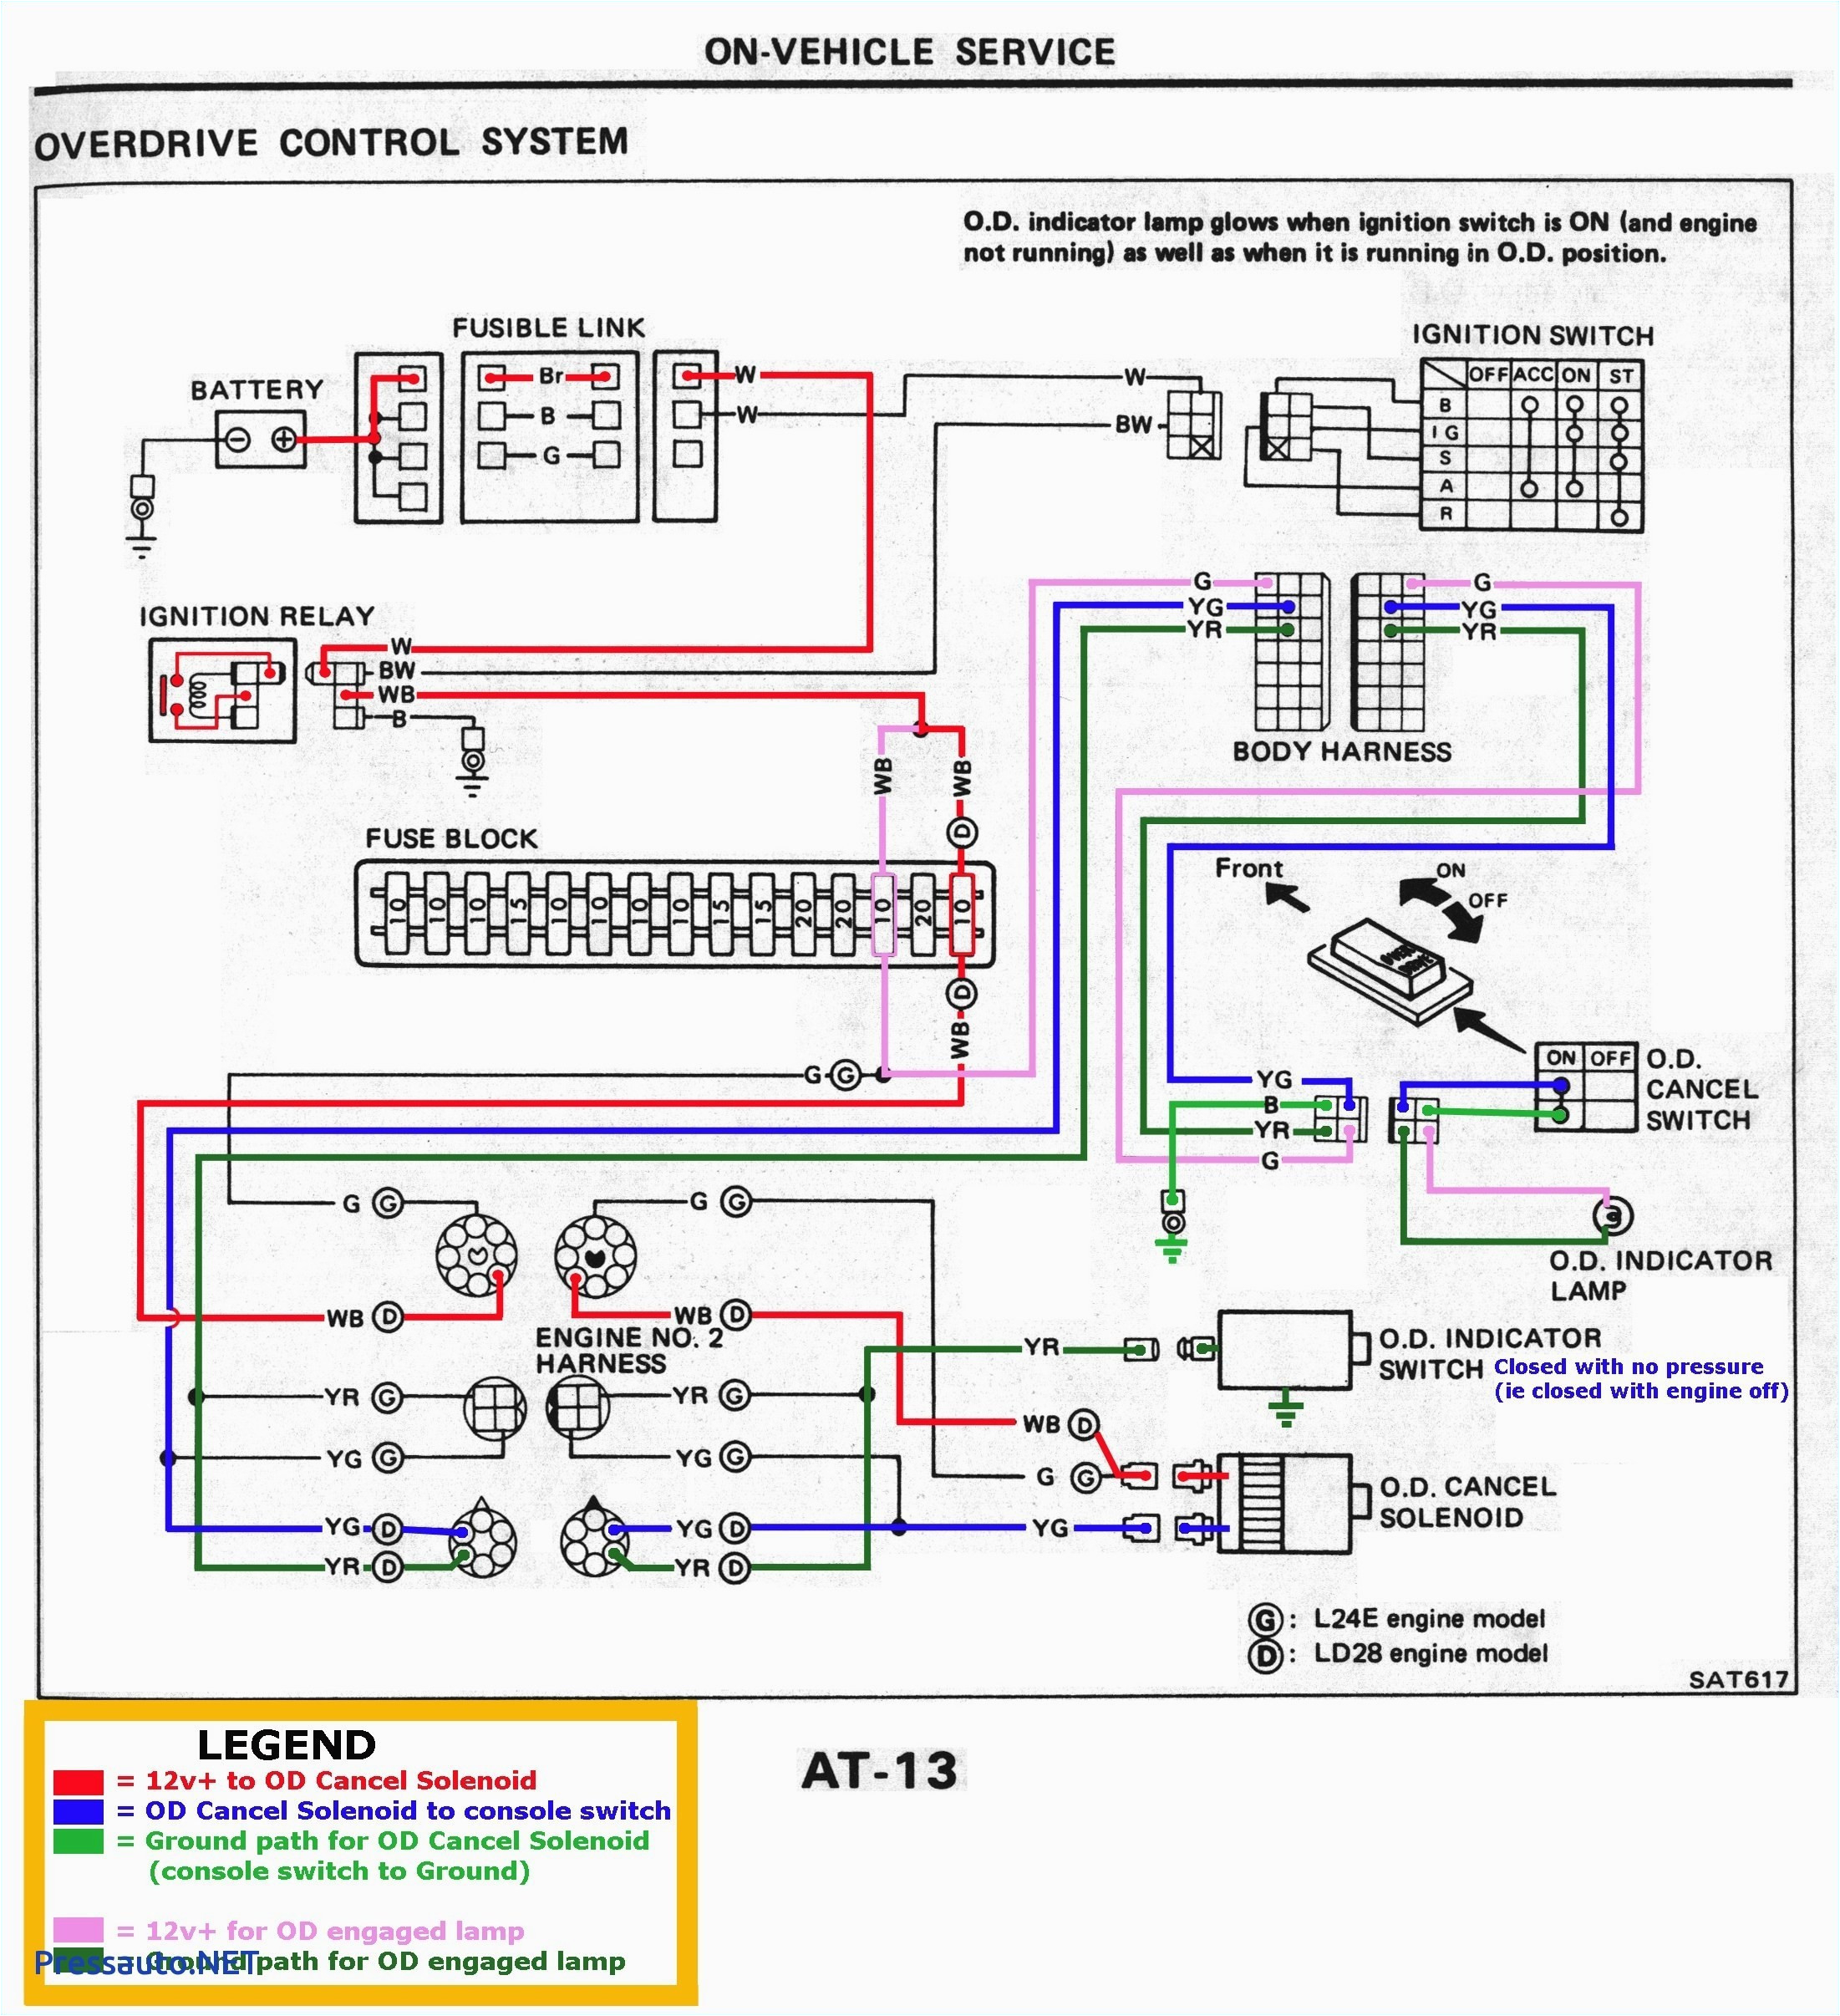 1965 oldsmobile 98 wiring diagram wiring diagram view simple series circuit diagram circuit diagrams for the od